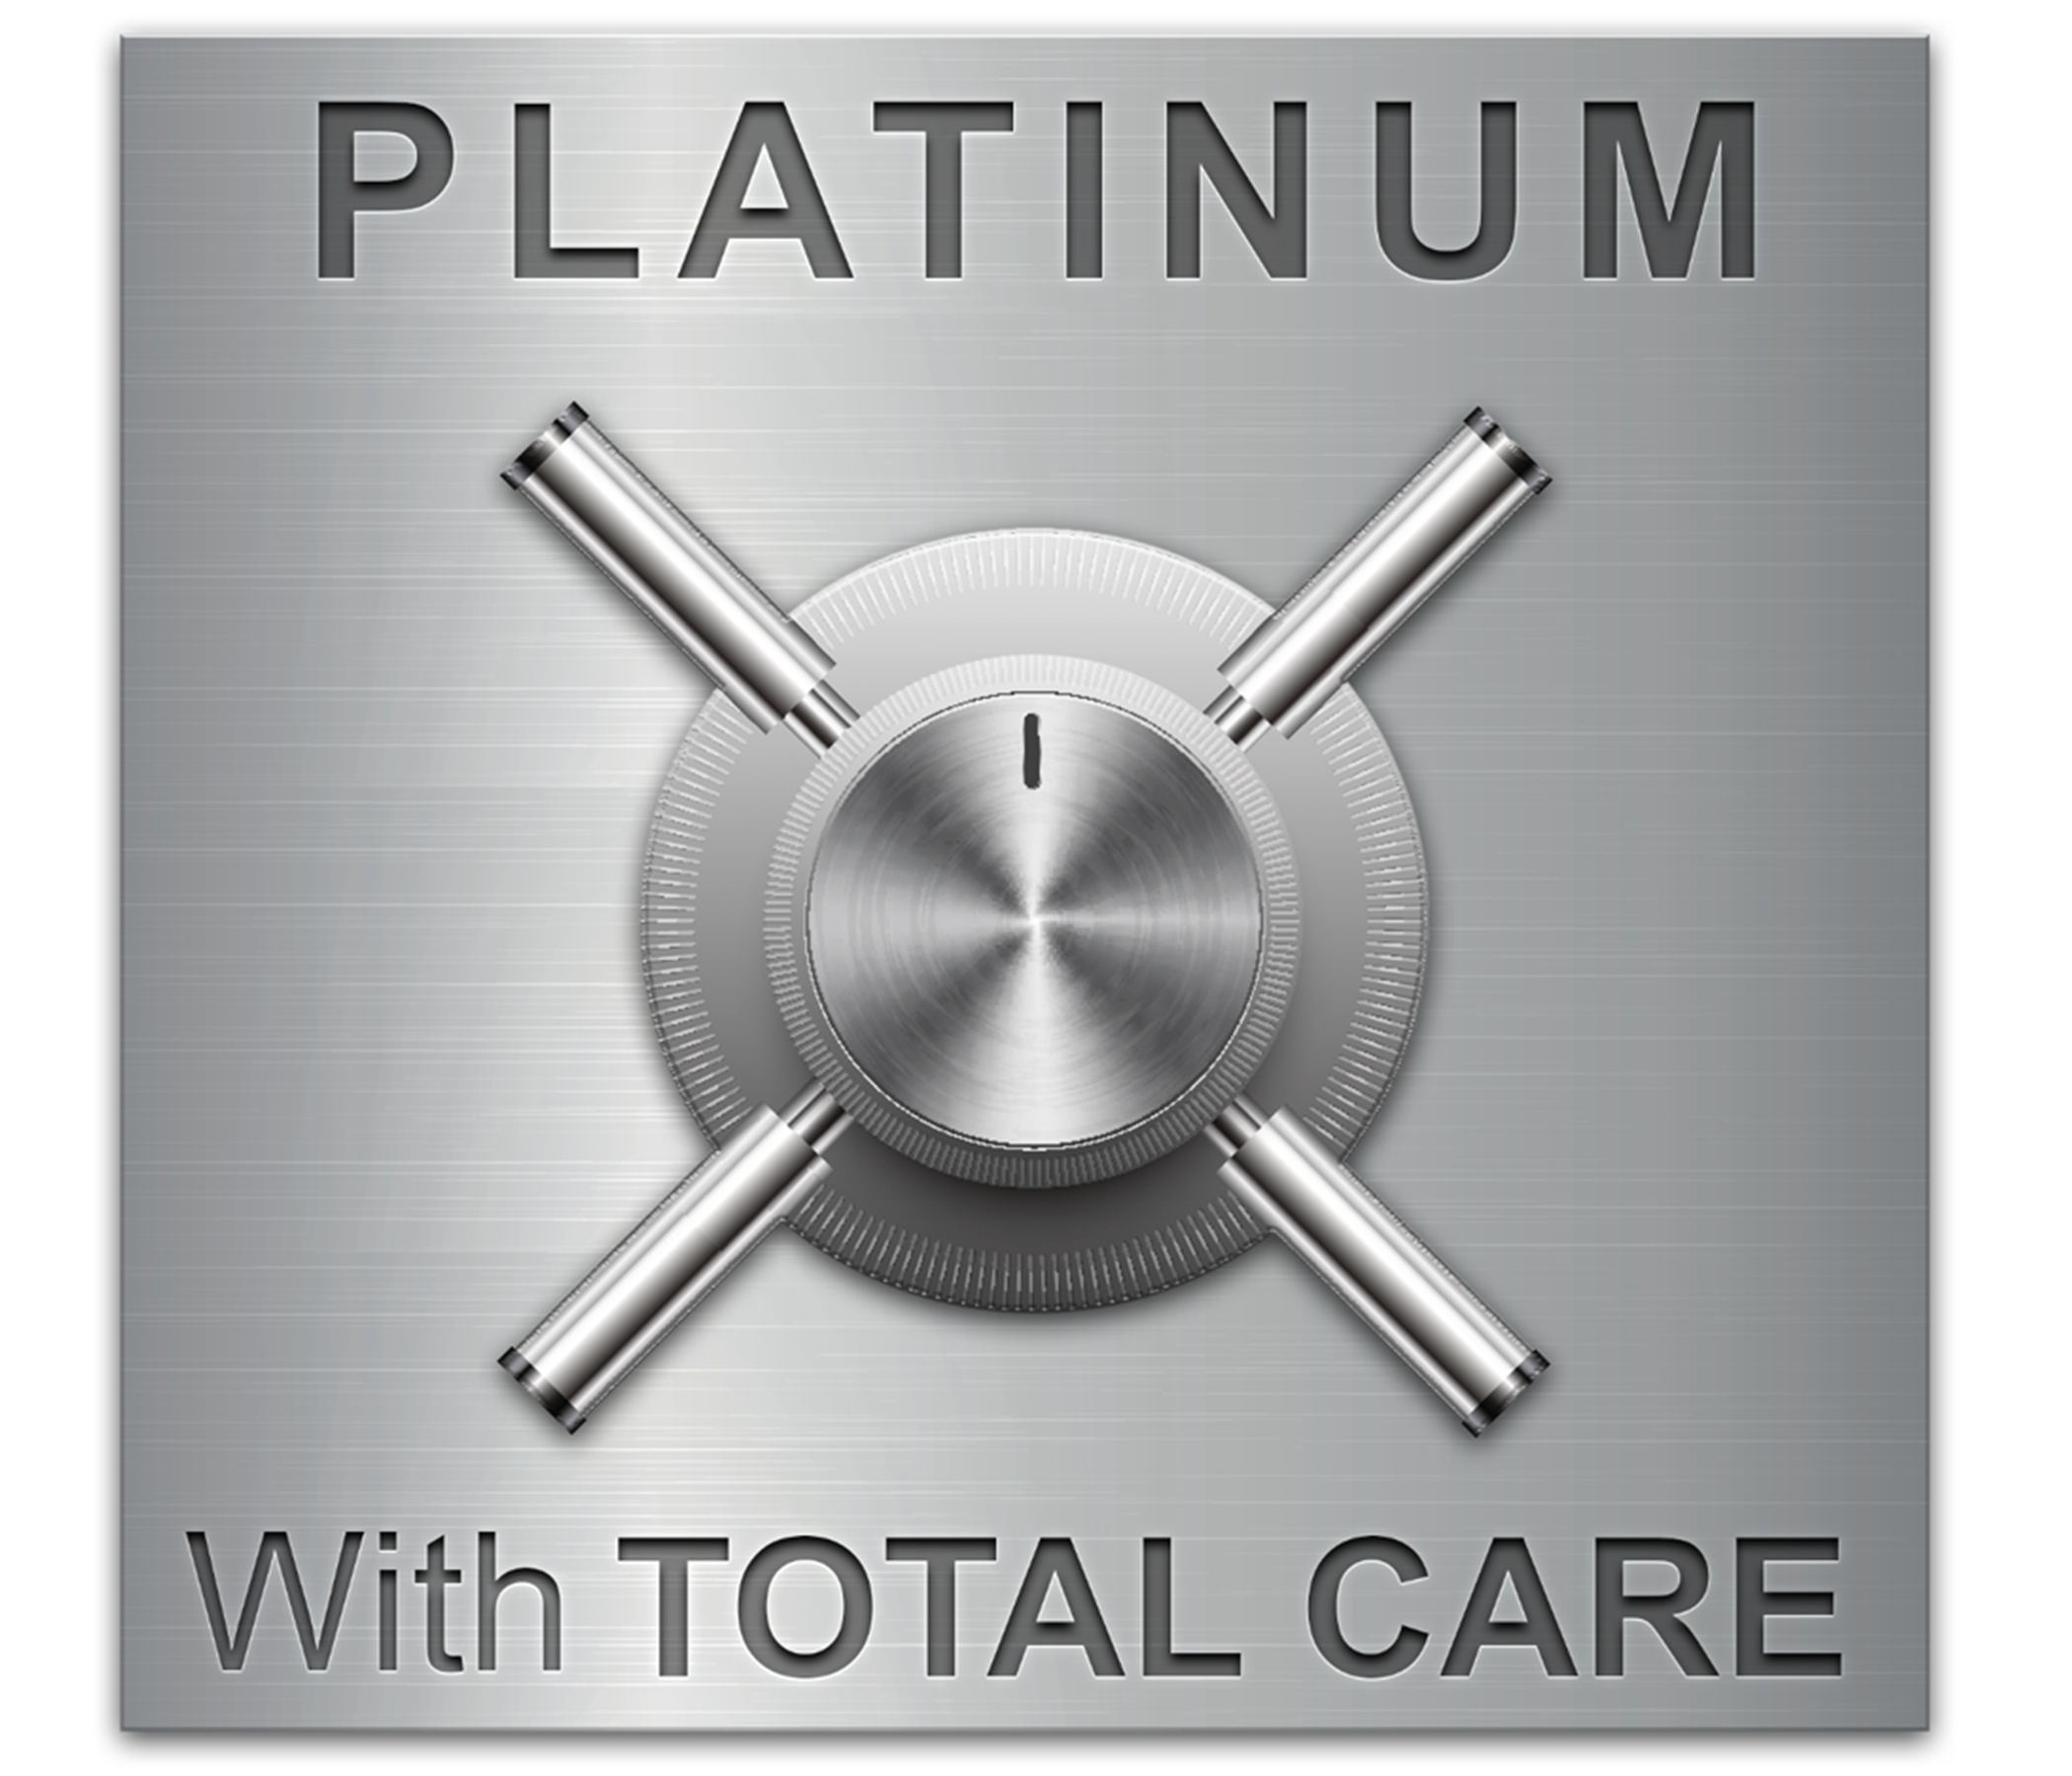 Platinum with Total Care... the best home warranty protection!